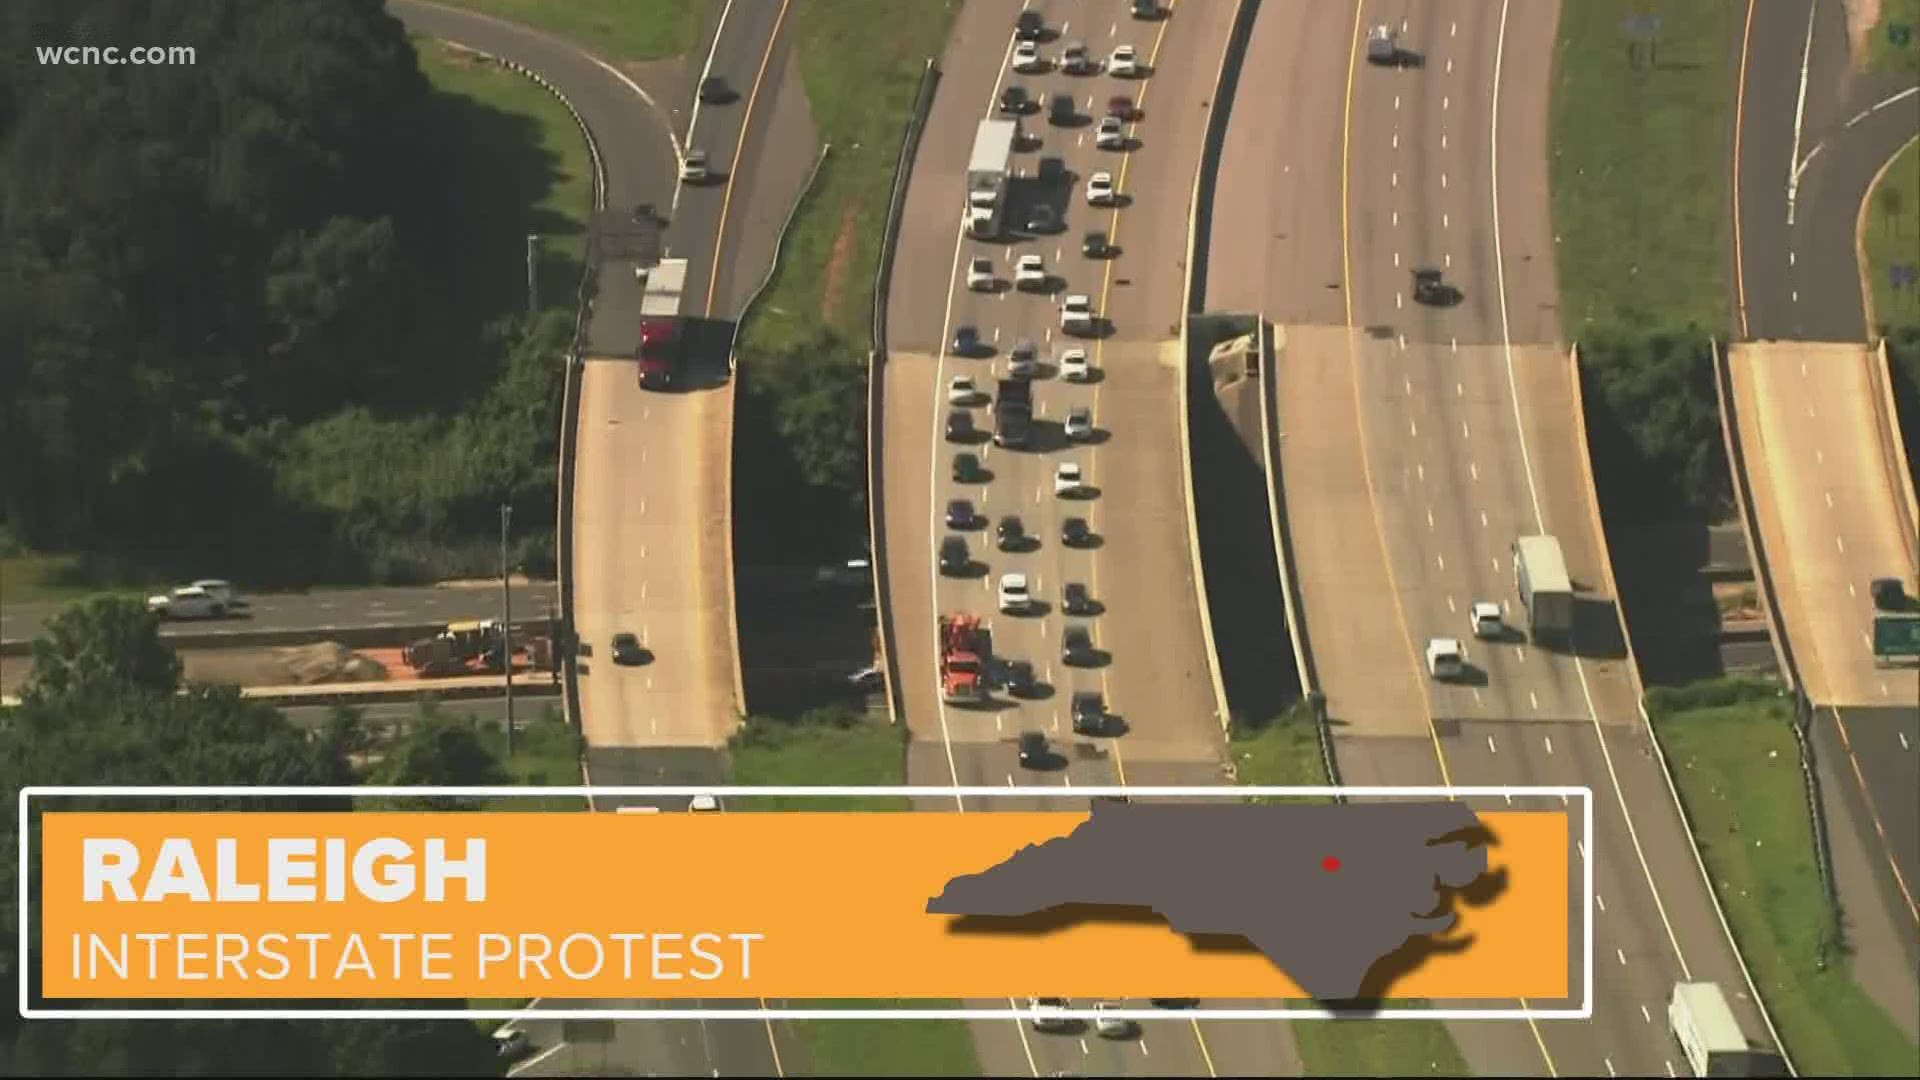 Hundreds of cars participate in protest in Raleigh, the Cares Act is now headed to SC Governor and a Charleston statue has officially been removed.